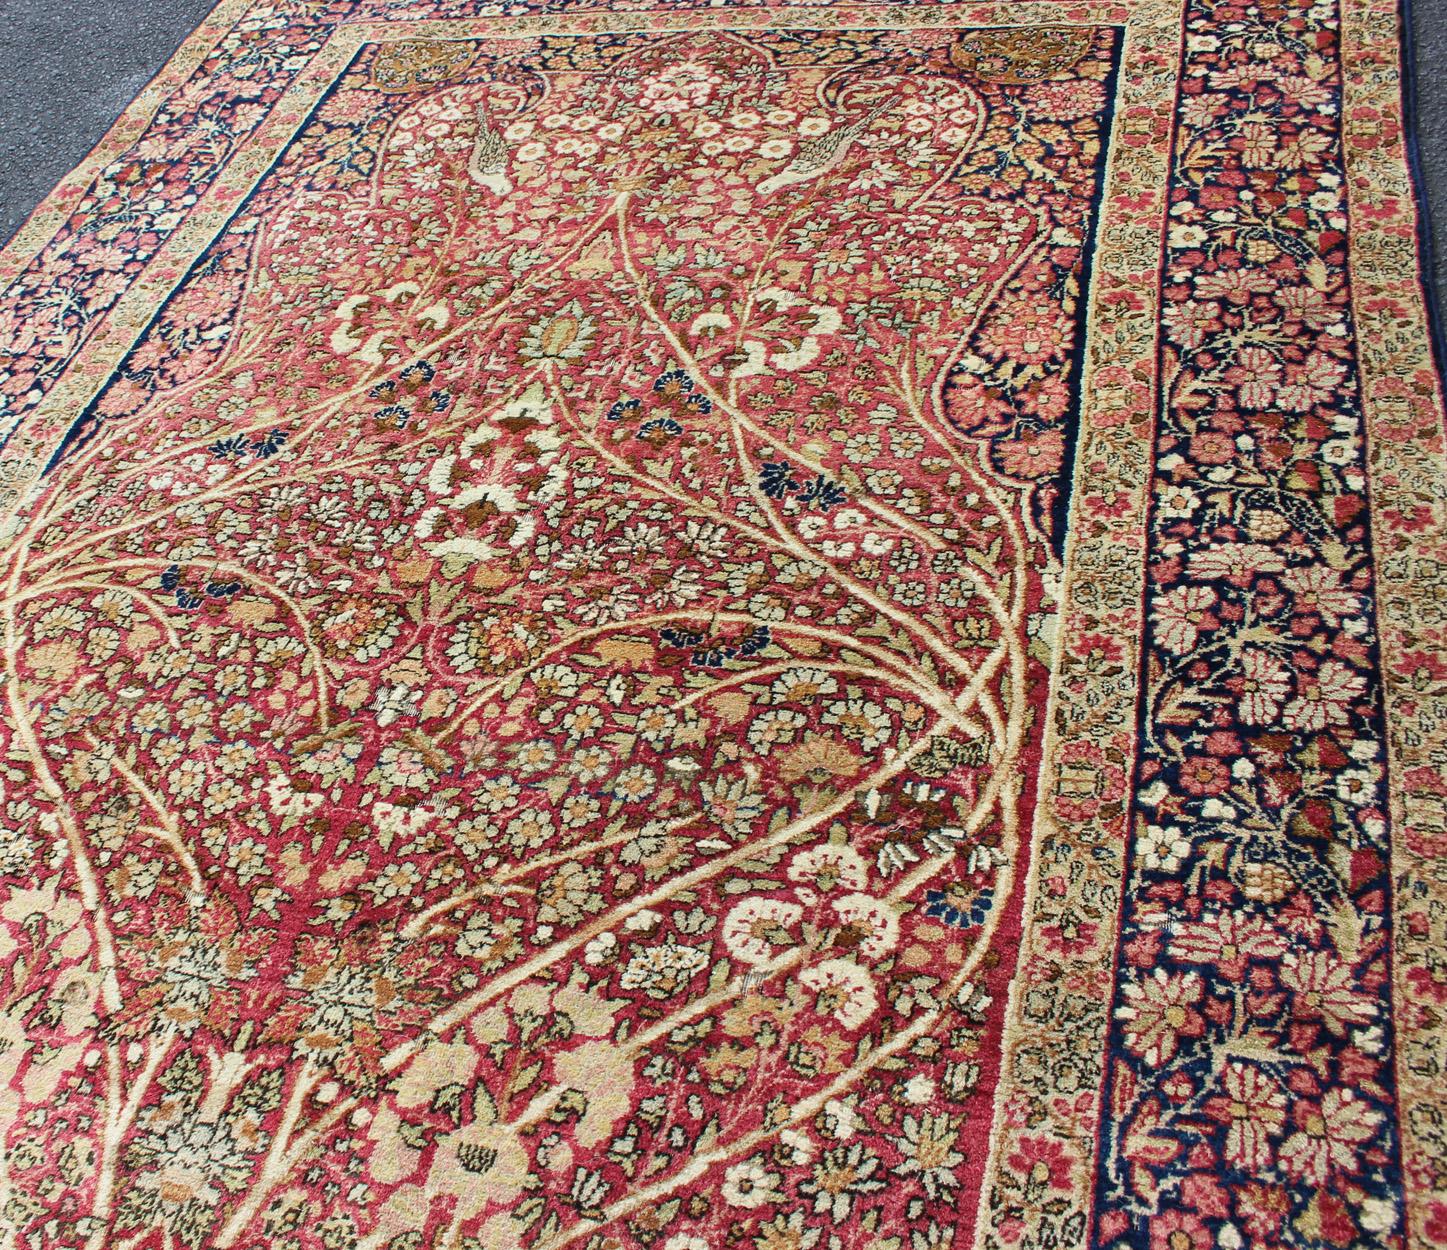 Late 19th Century Very Fine Antique Persian Lavar Kerman Rug with Intricate Floral Design  For Sale